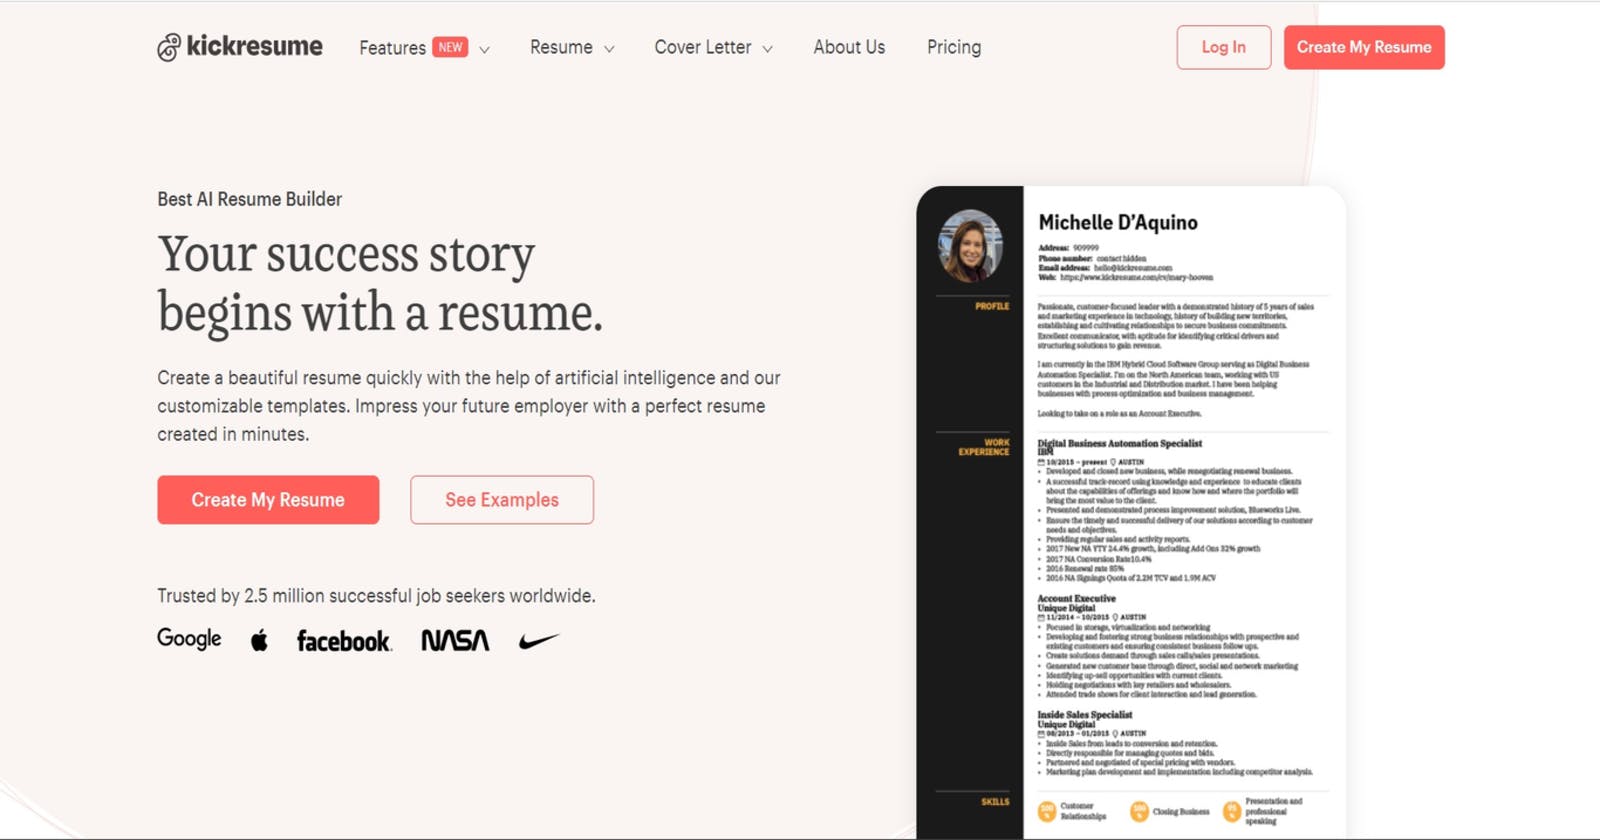 Create an Impressive Resume with Kickresume: The Best AI Resume Builder